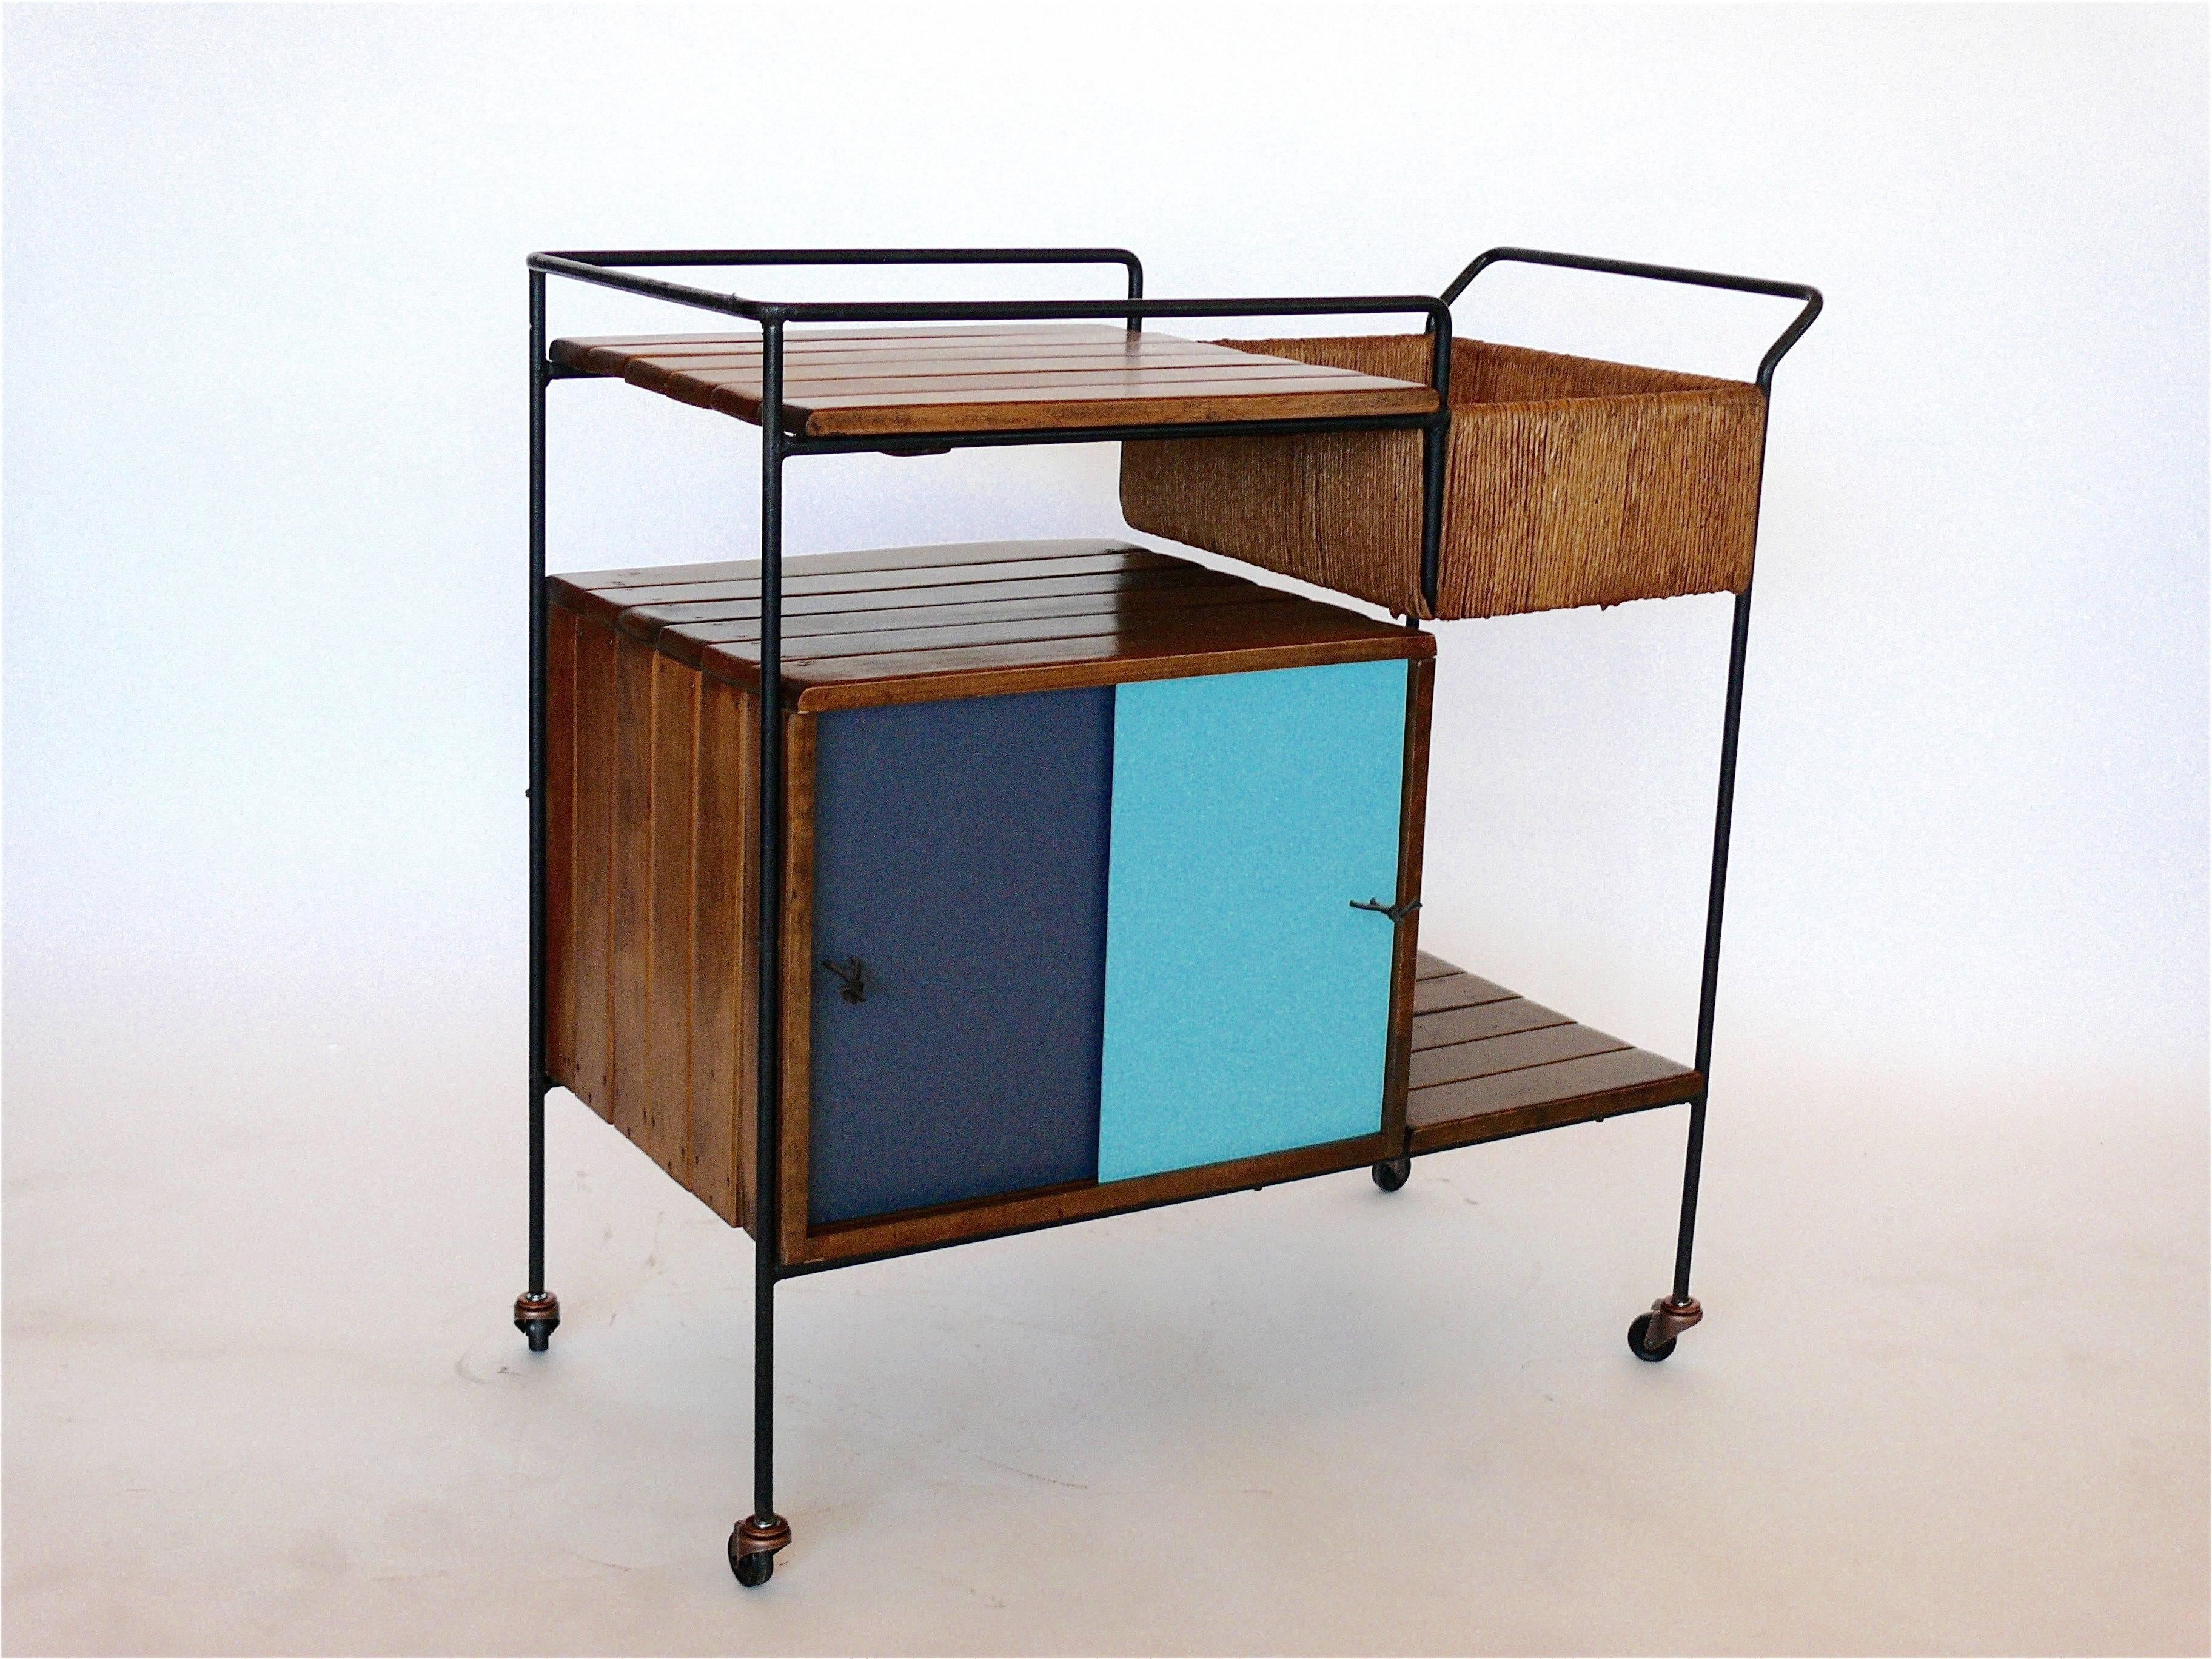 Fantastic bar cart by Arthur Umanoff for Raymor. Iron framed cart features slatted wood, multiple rushed wicker shelves and an enclosed cabinet with sliding doors that have been newly lacquered. 
Great colors and in excellent vintage condition.